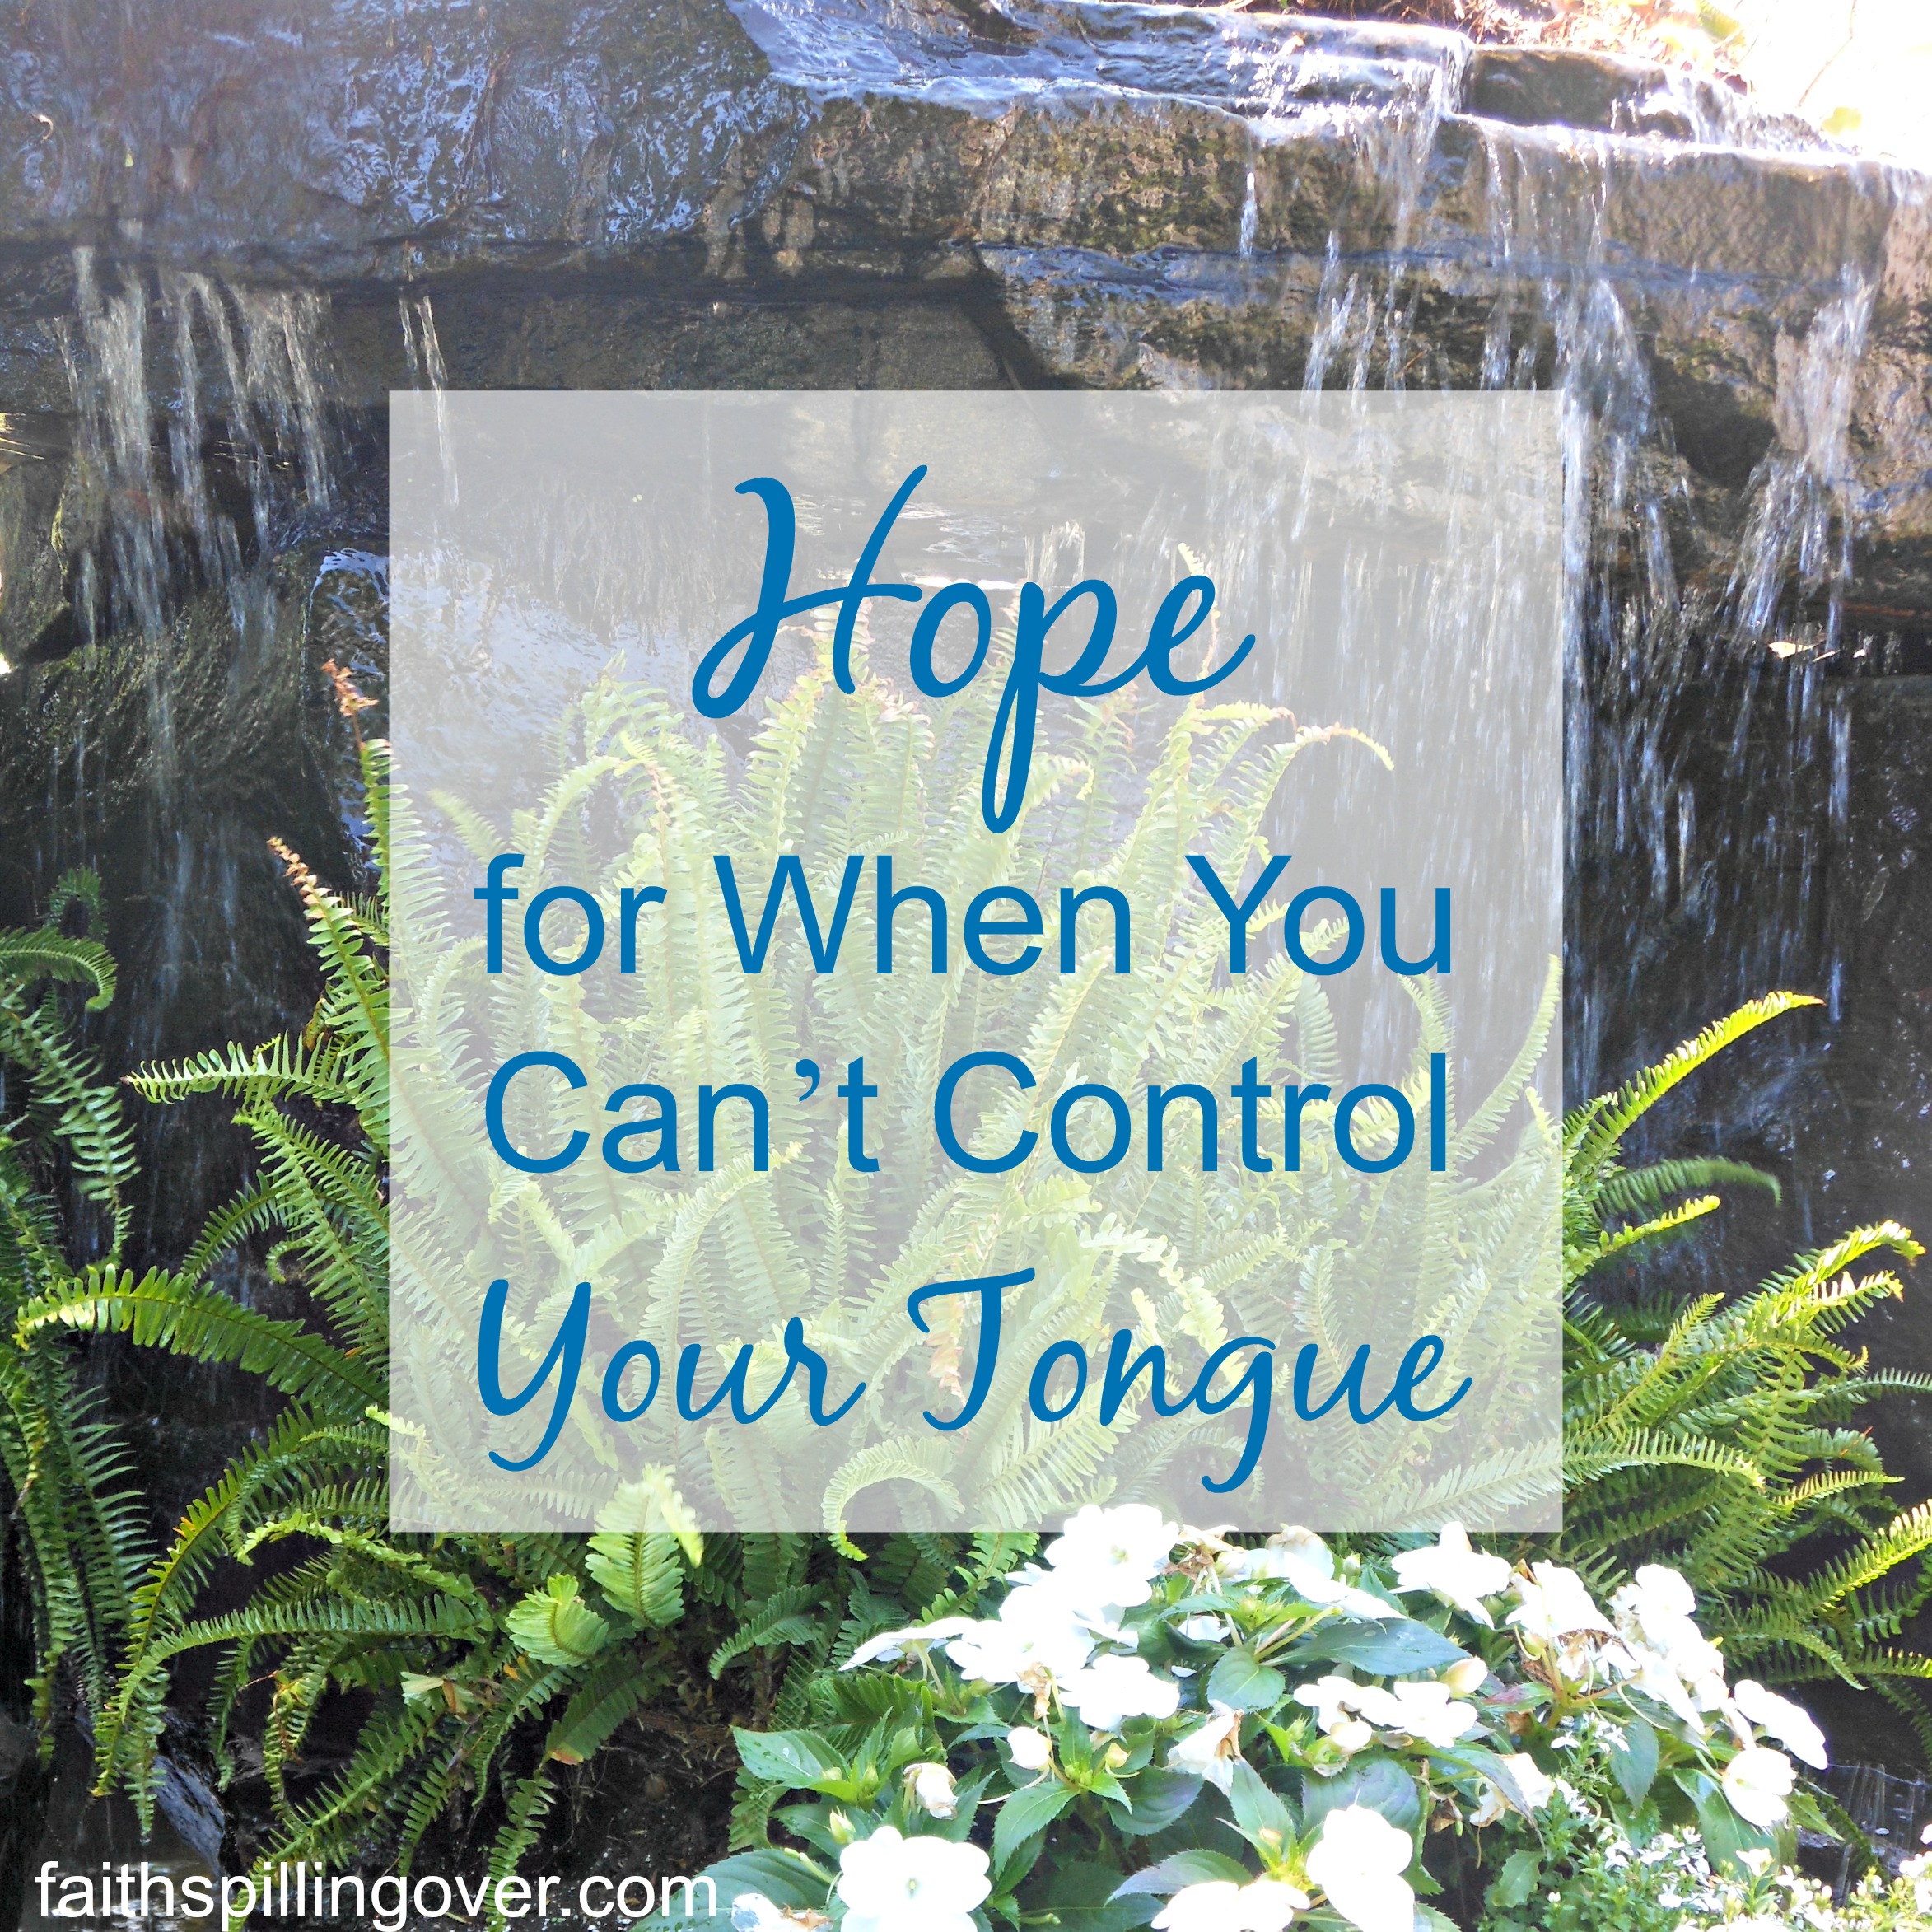 Hope for when you can't control your tongue